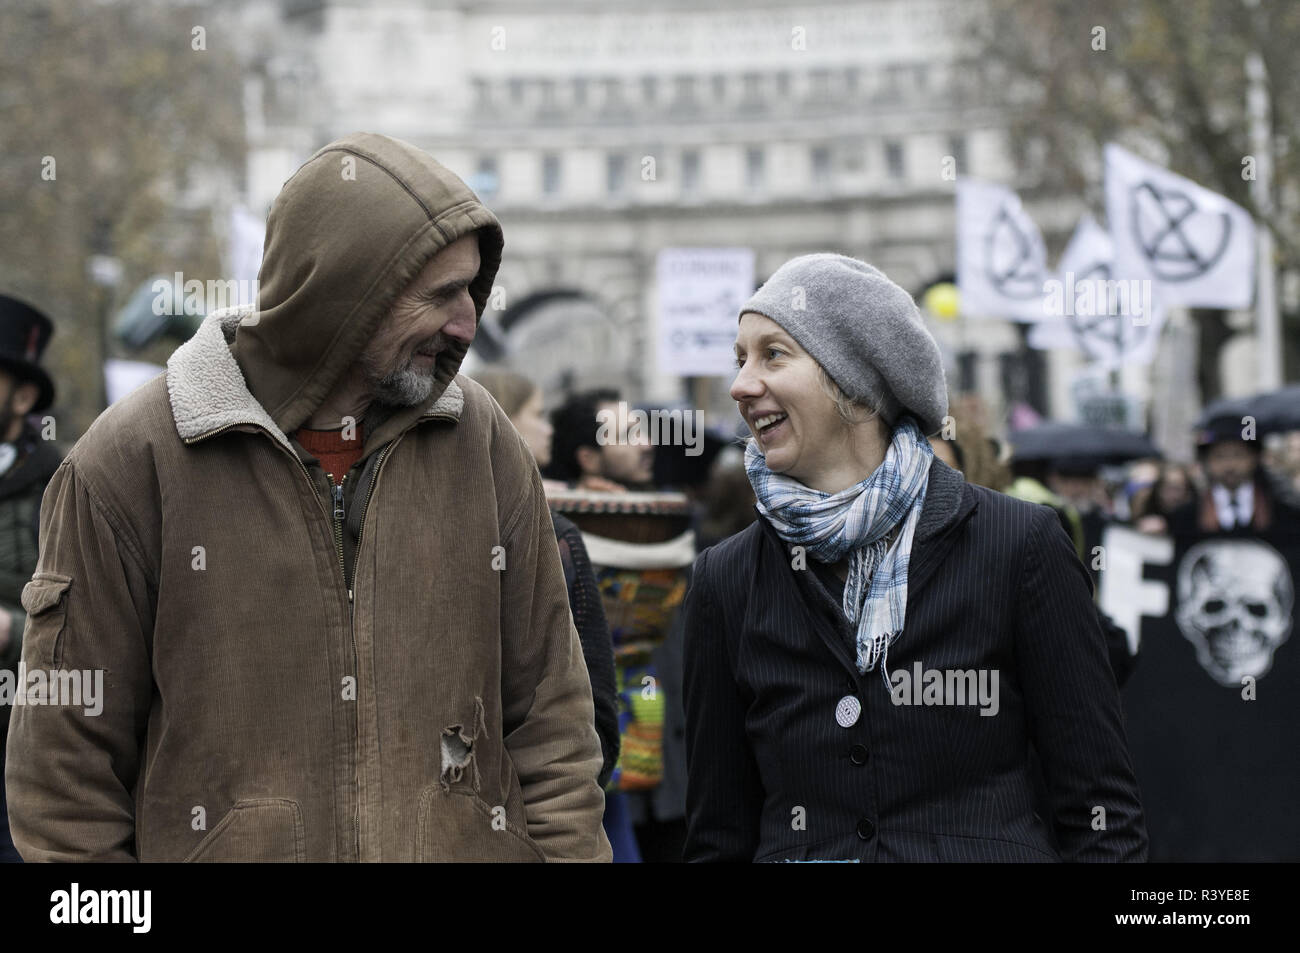 London, Greater London, UK. 24th Nov, 2018. Extinction Rebellion campaigners Roger Hallam (Left) and Dr Gail Bradbroock (Right) seen at the front of the march.Thousands of demonstrators from the new Extinction Rebellion climate change movement gathered at Parliament Square for a memorial and funeral march through London. Demonstrators paid homage to the lives lost due to climate change, and marched carrying a coffin from Parliament Square to Buckingham Palace. Credit: Andres Pantoja/SOPA Images/ZUMA Wire/Alamy Live News Stock Photo